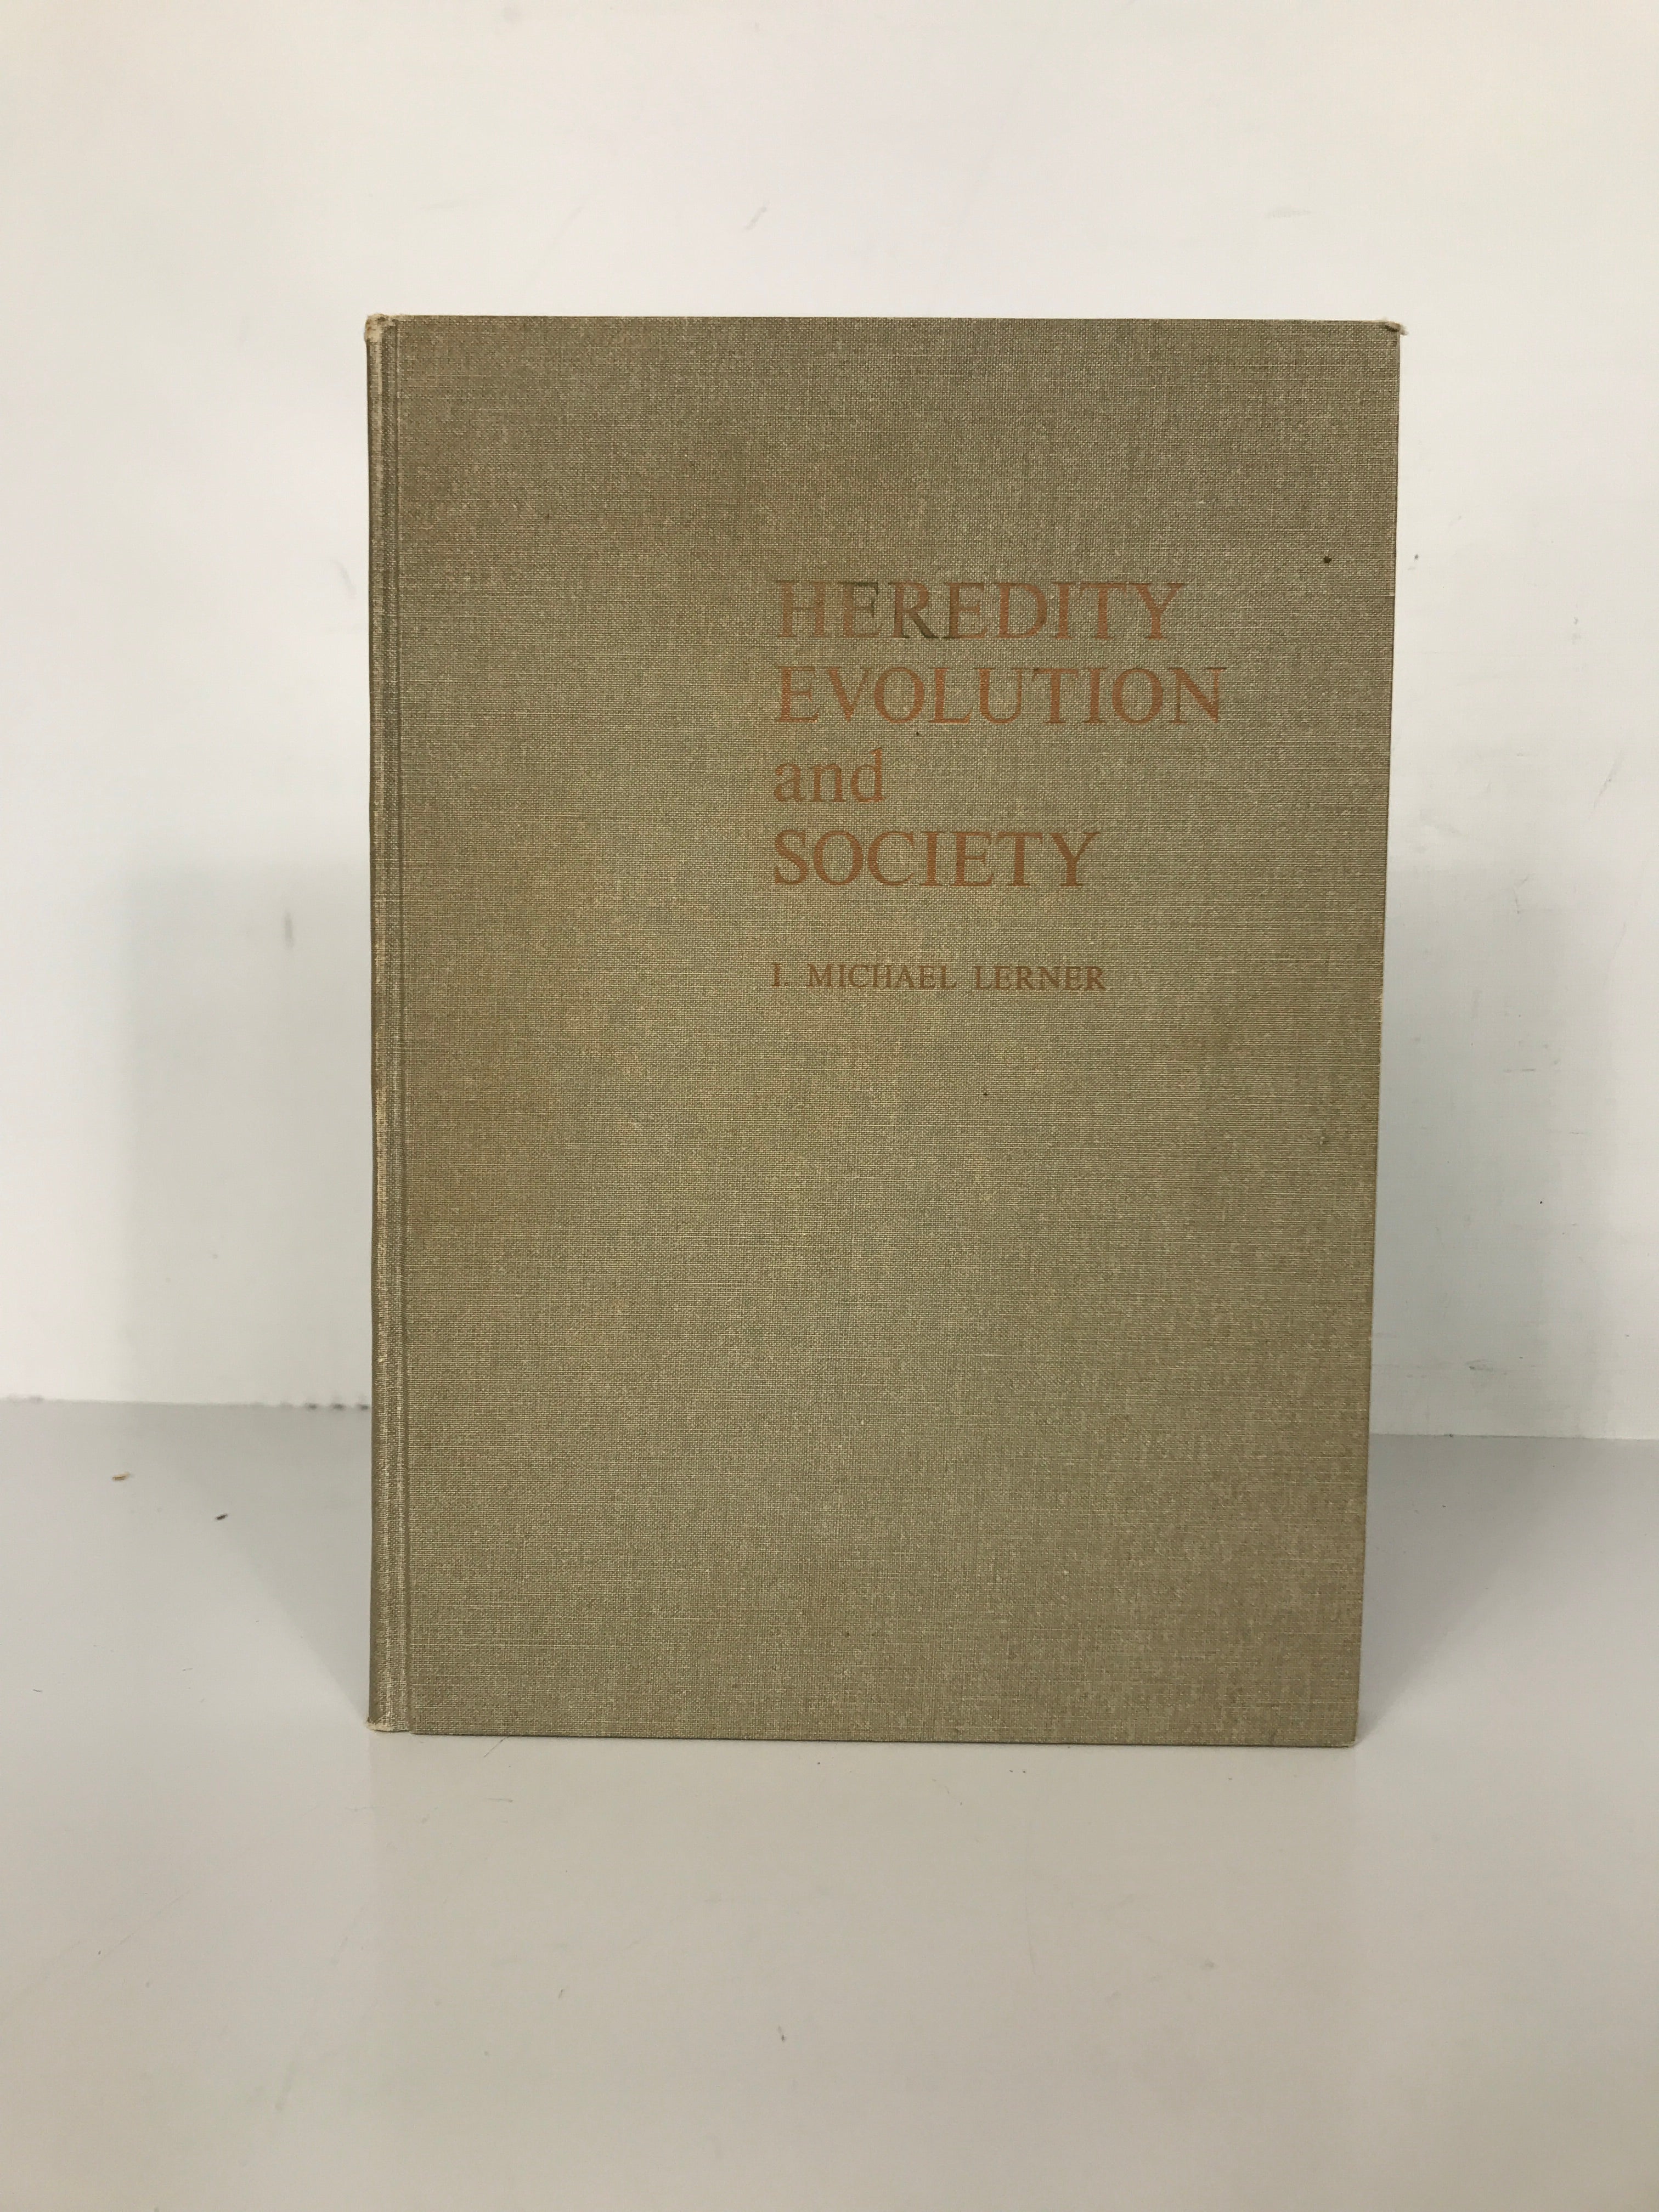 Lot of 2 The Direction of Human Evolution / Heredity Evolution and Society HC